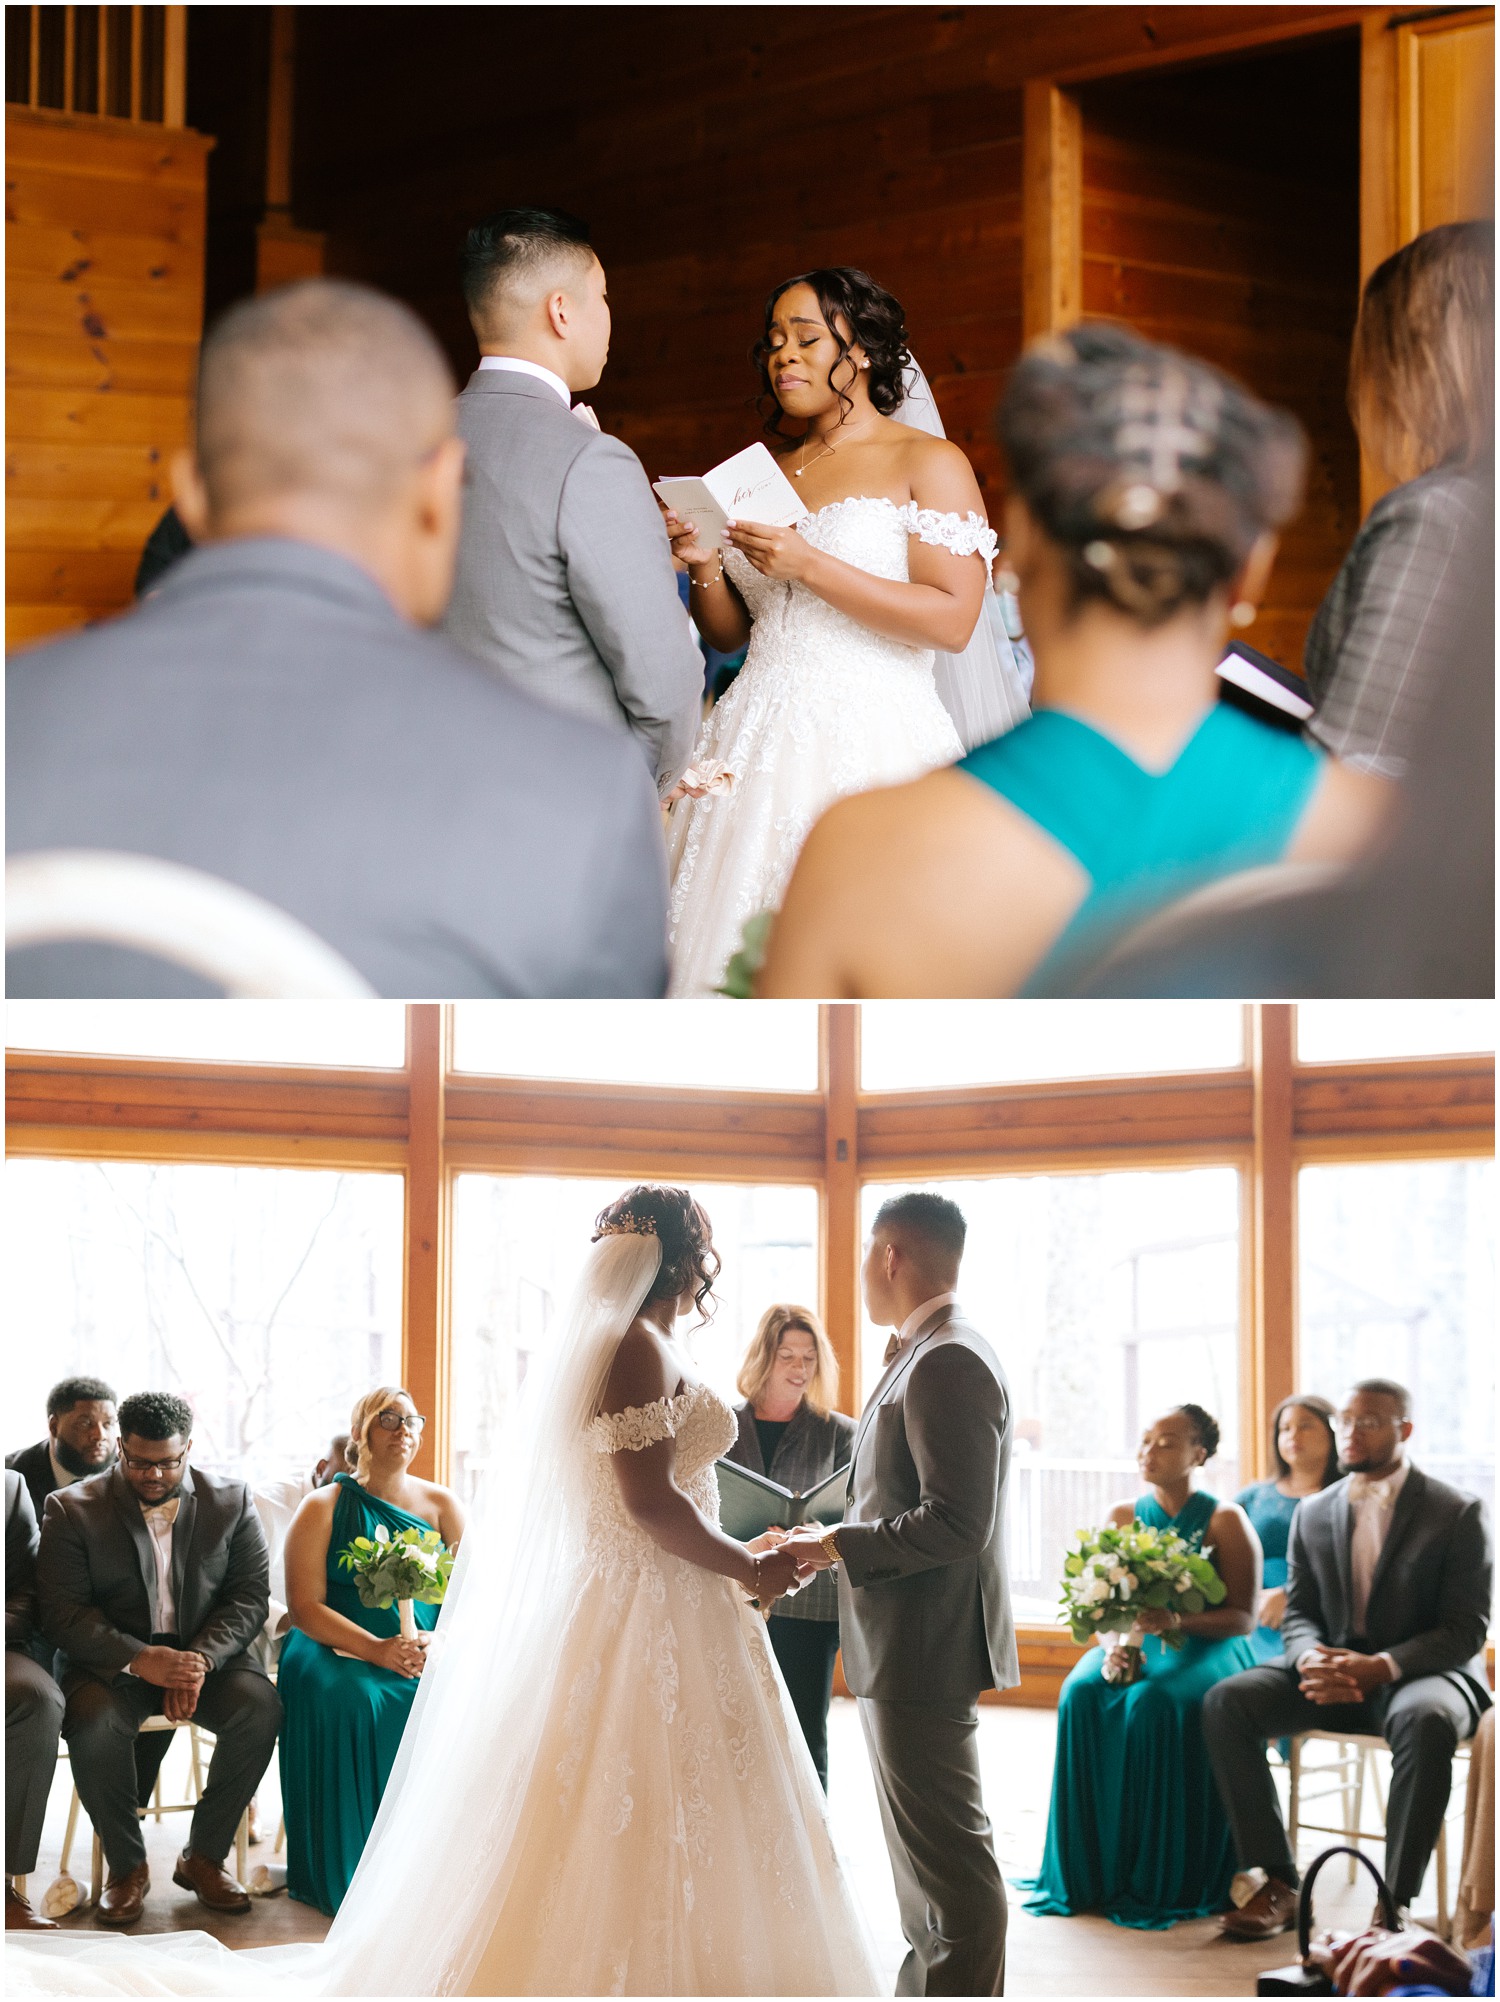 Bride gets emotional reading her vows during wedding ceremony at The Barn at Valhalla in Raleigh, NC